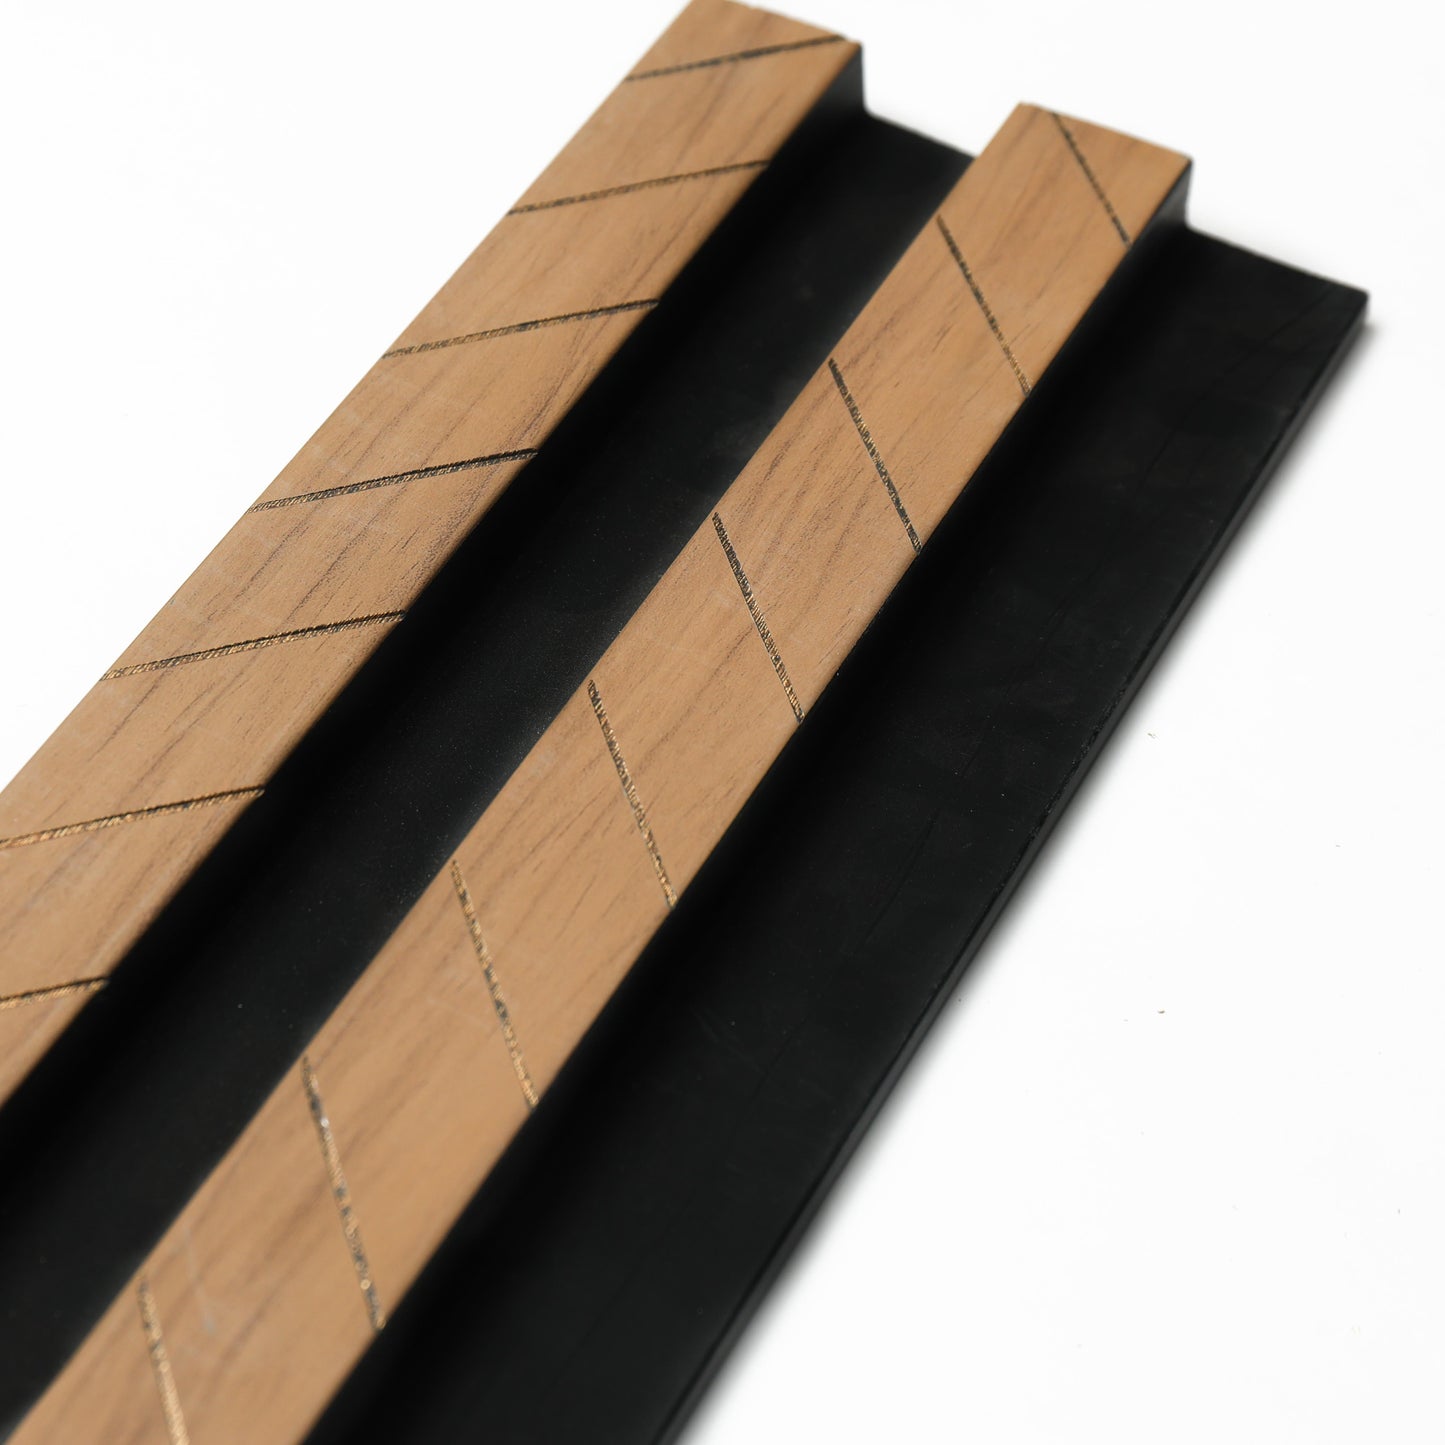 Plain wood charcoal louver and plank | 9.5 Feet * 5 Inch